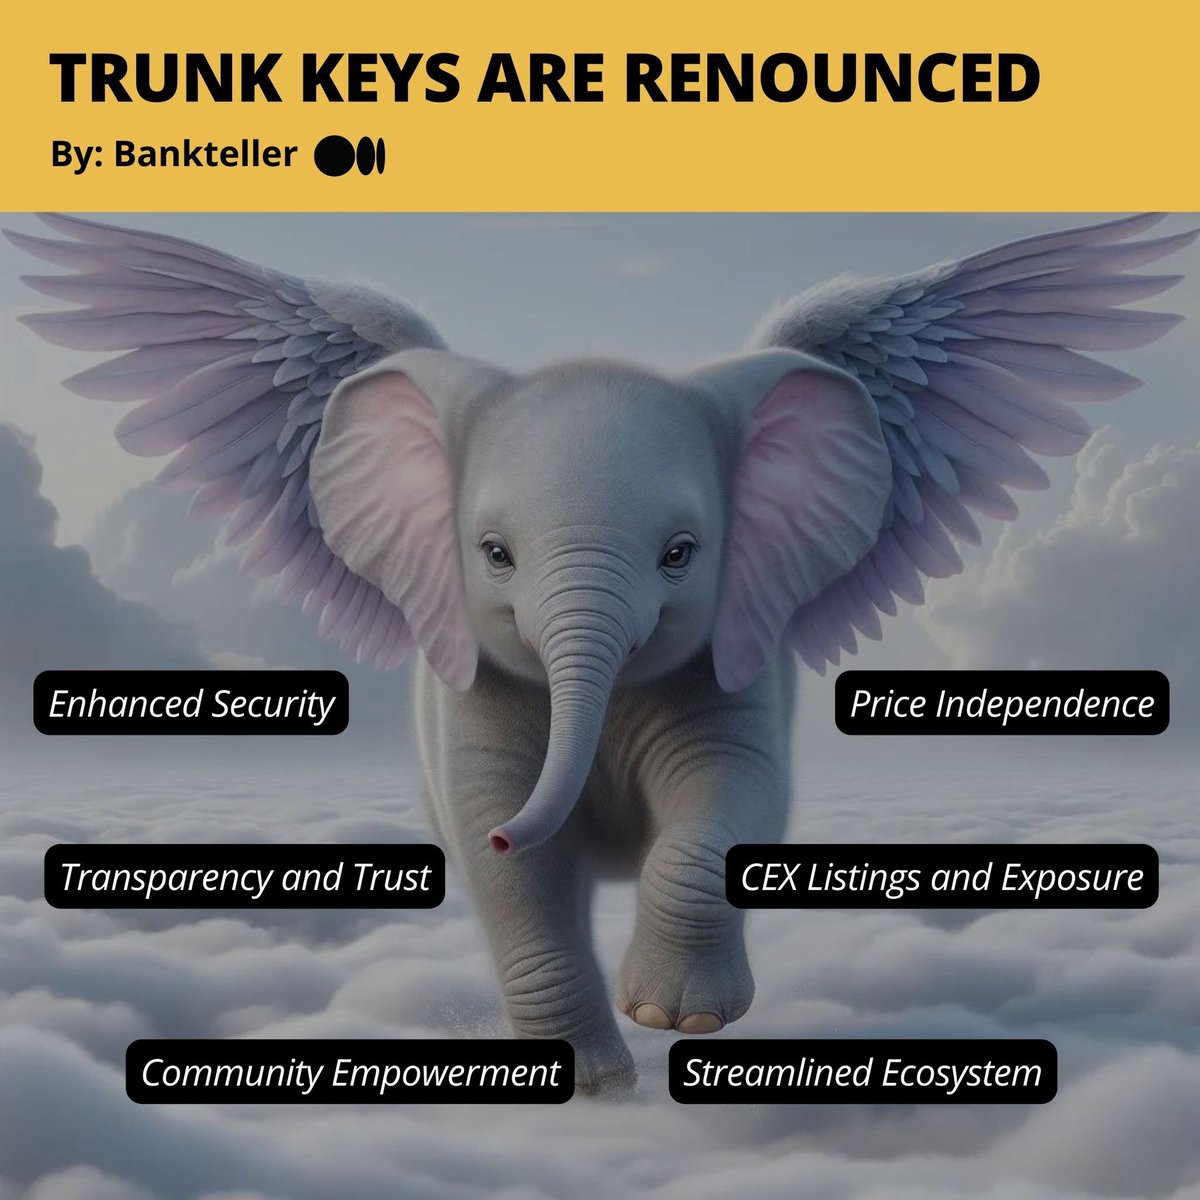 You definetely don't want to miss this one.
$trunk is one of the gems from the elephant.money ecosystem
A #deflationary #memecoin. I love it😍 Extra #yield if you put you're $trunk in $trumpet. Get more while you are enjoying #life
Best #Cryptocurency @
#DeFi #Protocols